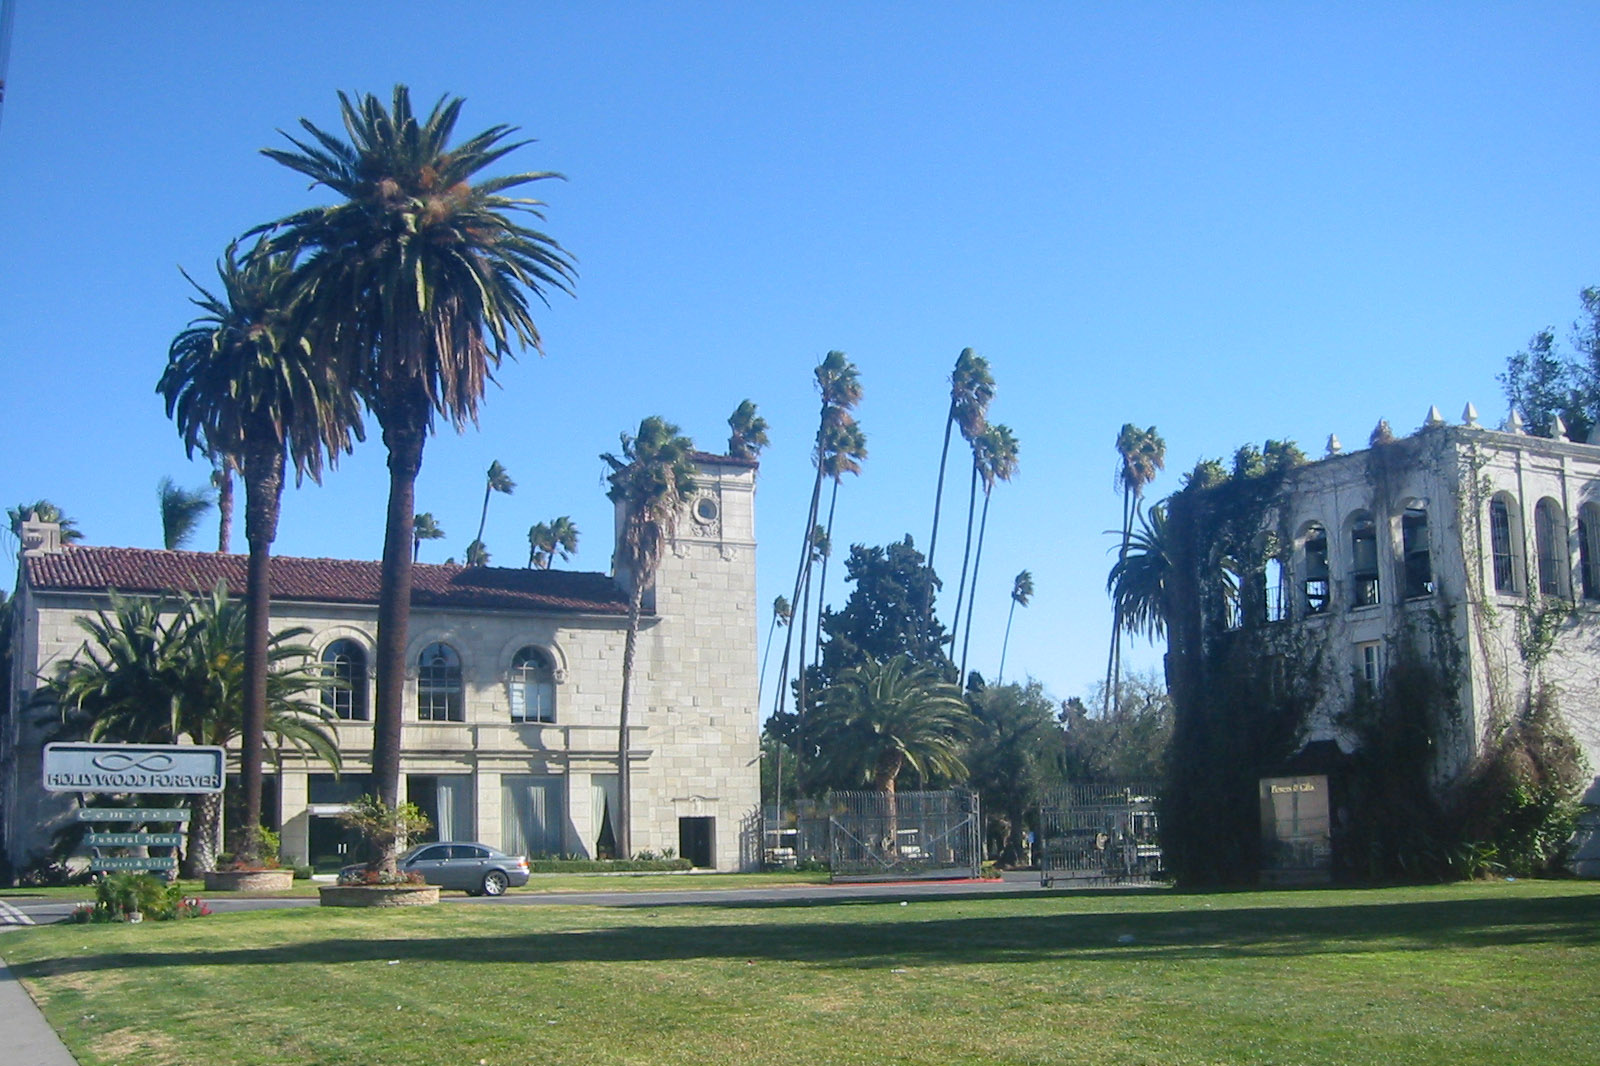 the lawn and buildings at the hollywood forever cemetery